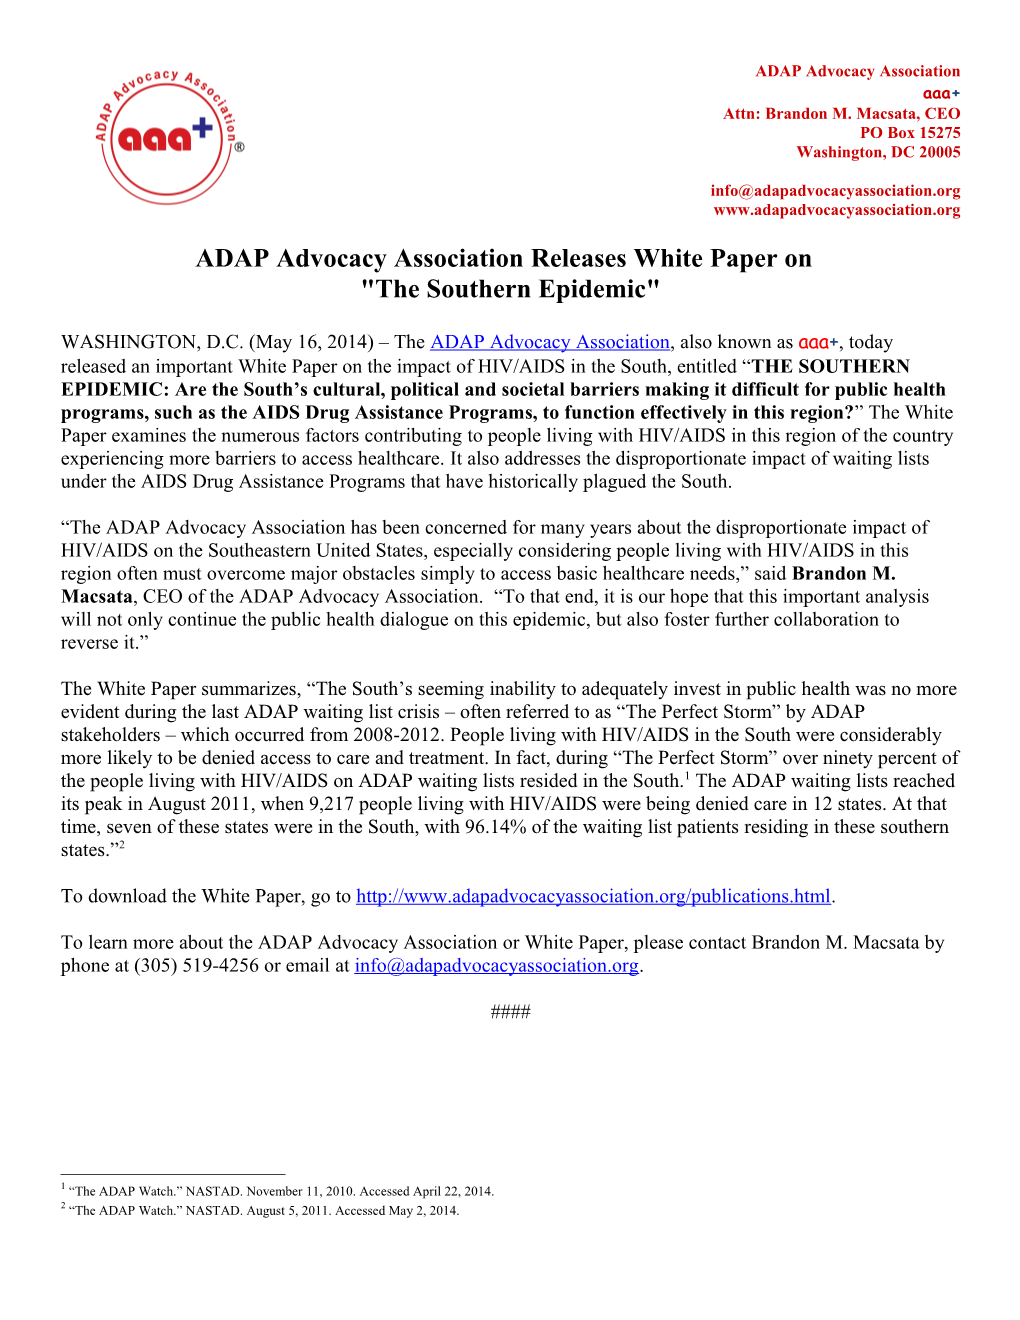 ADAP Advocacy Association February 7, 200 Page 2 of 2 ADAP ADVOCACY ASSOCIATION RECOGNIZES